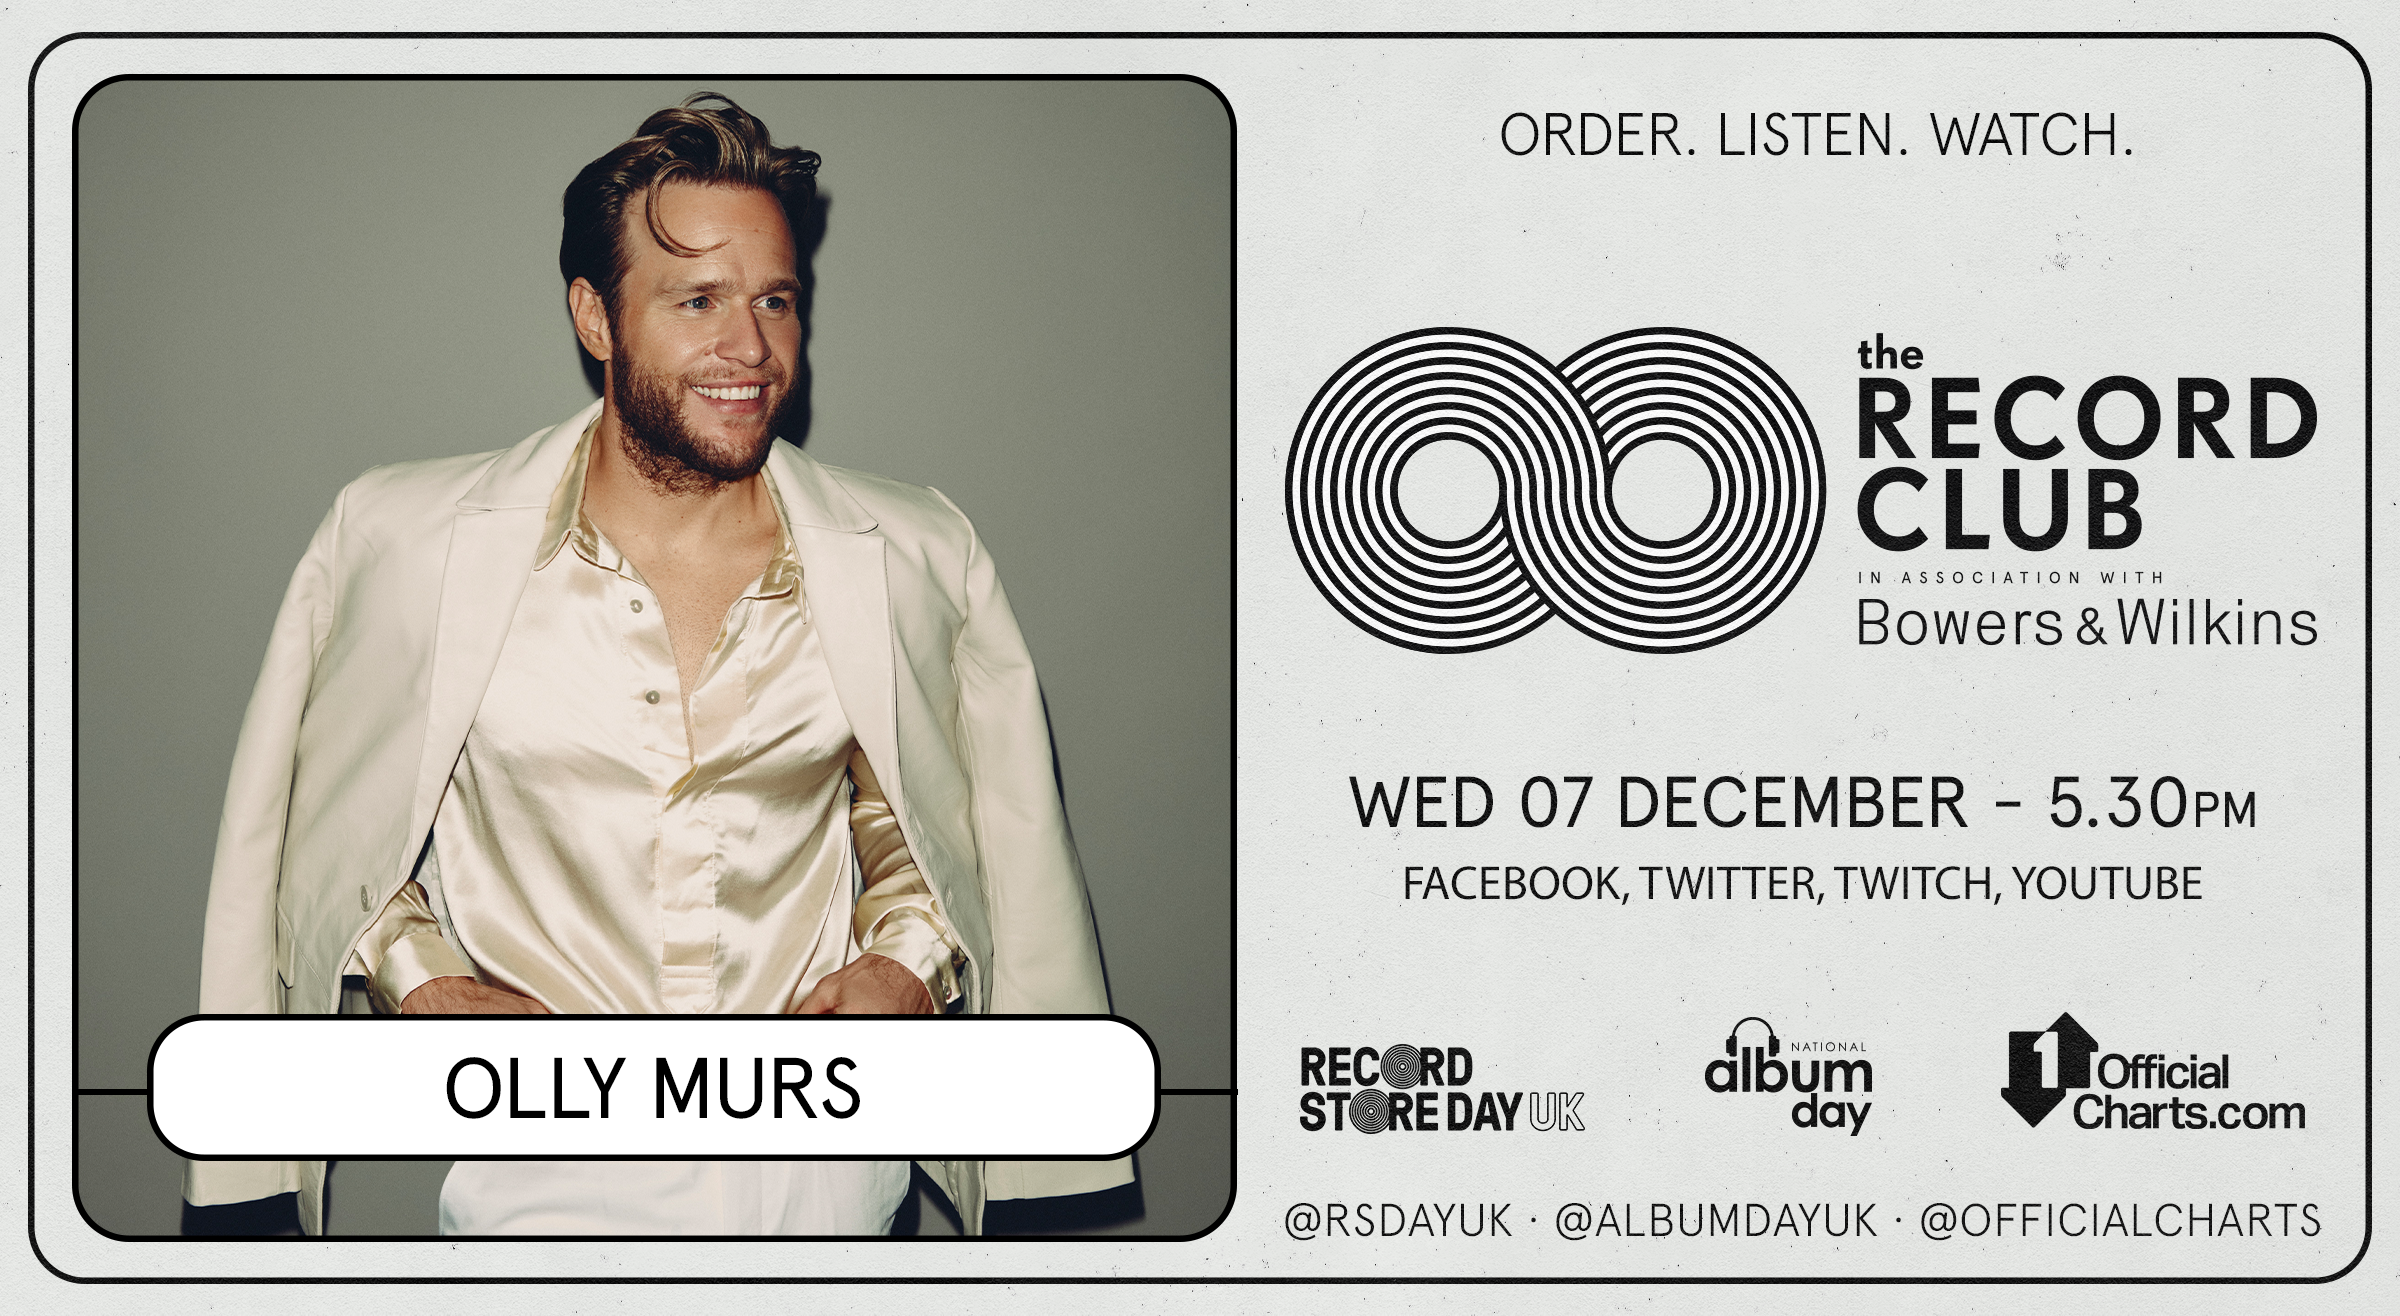 Olly Murs announced as this week's The Record Club guest